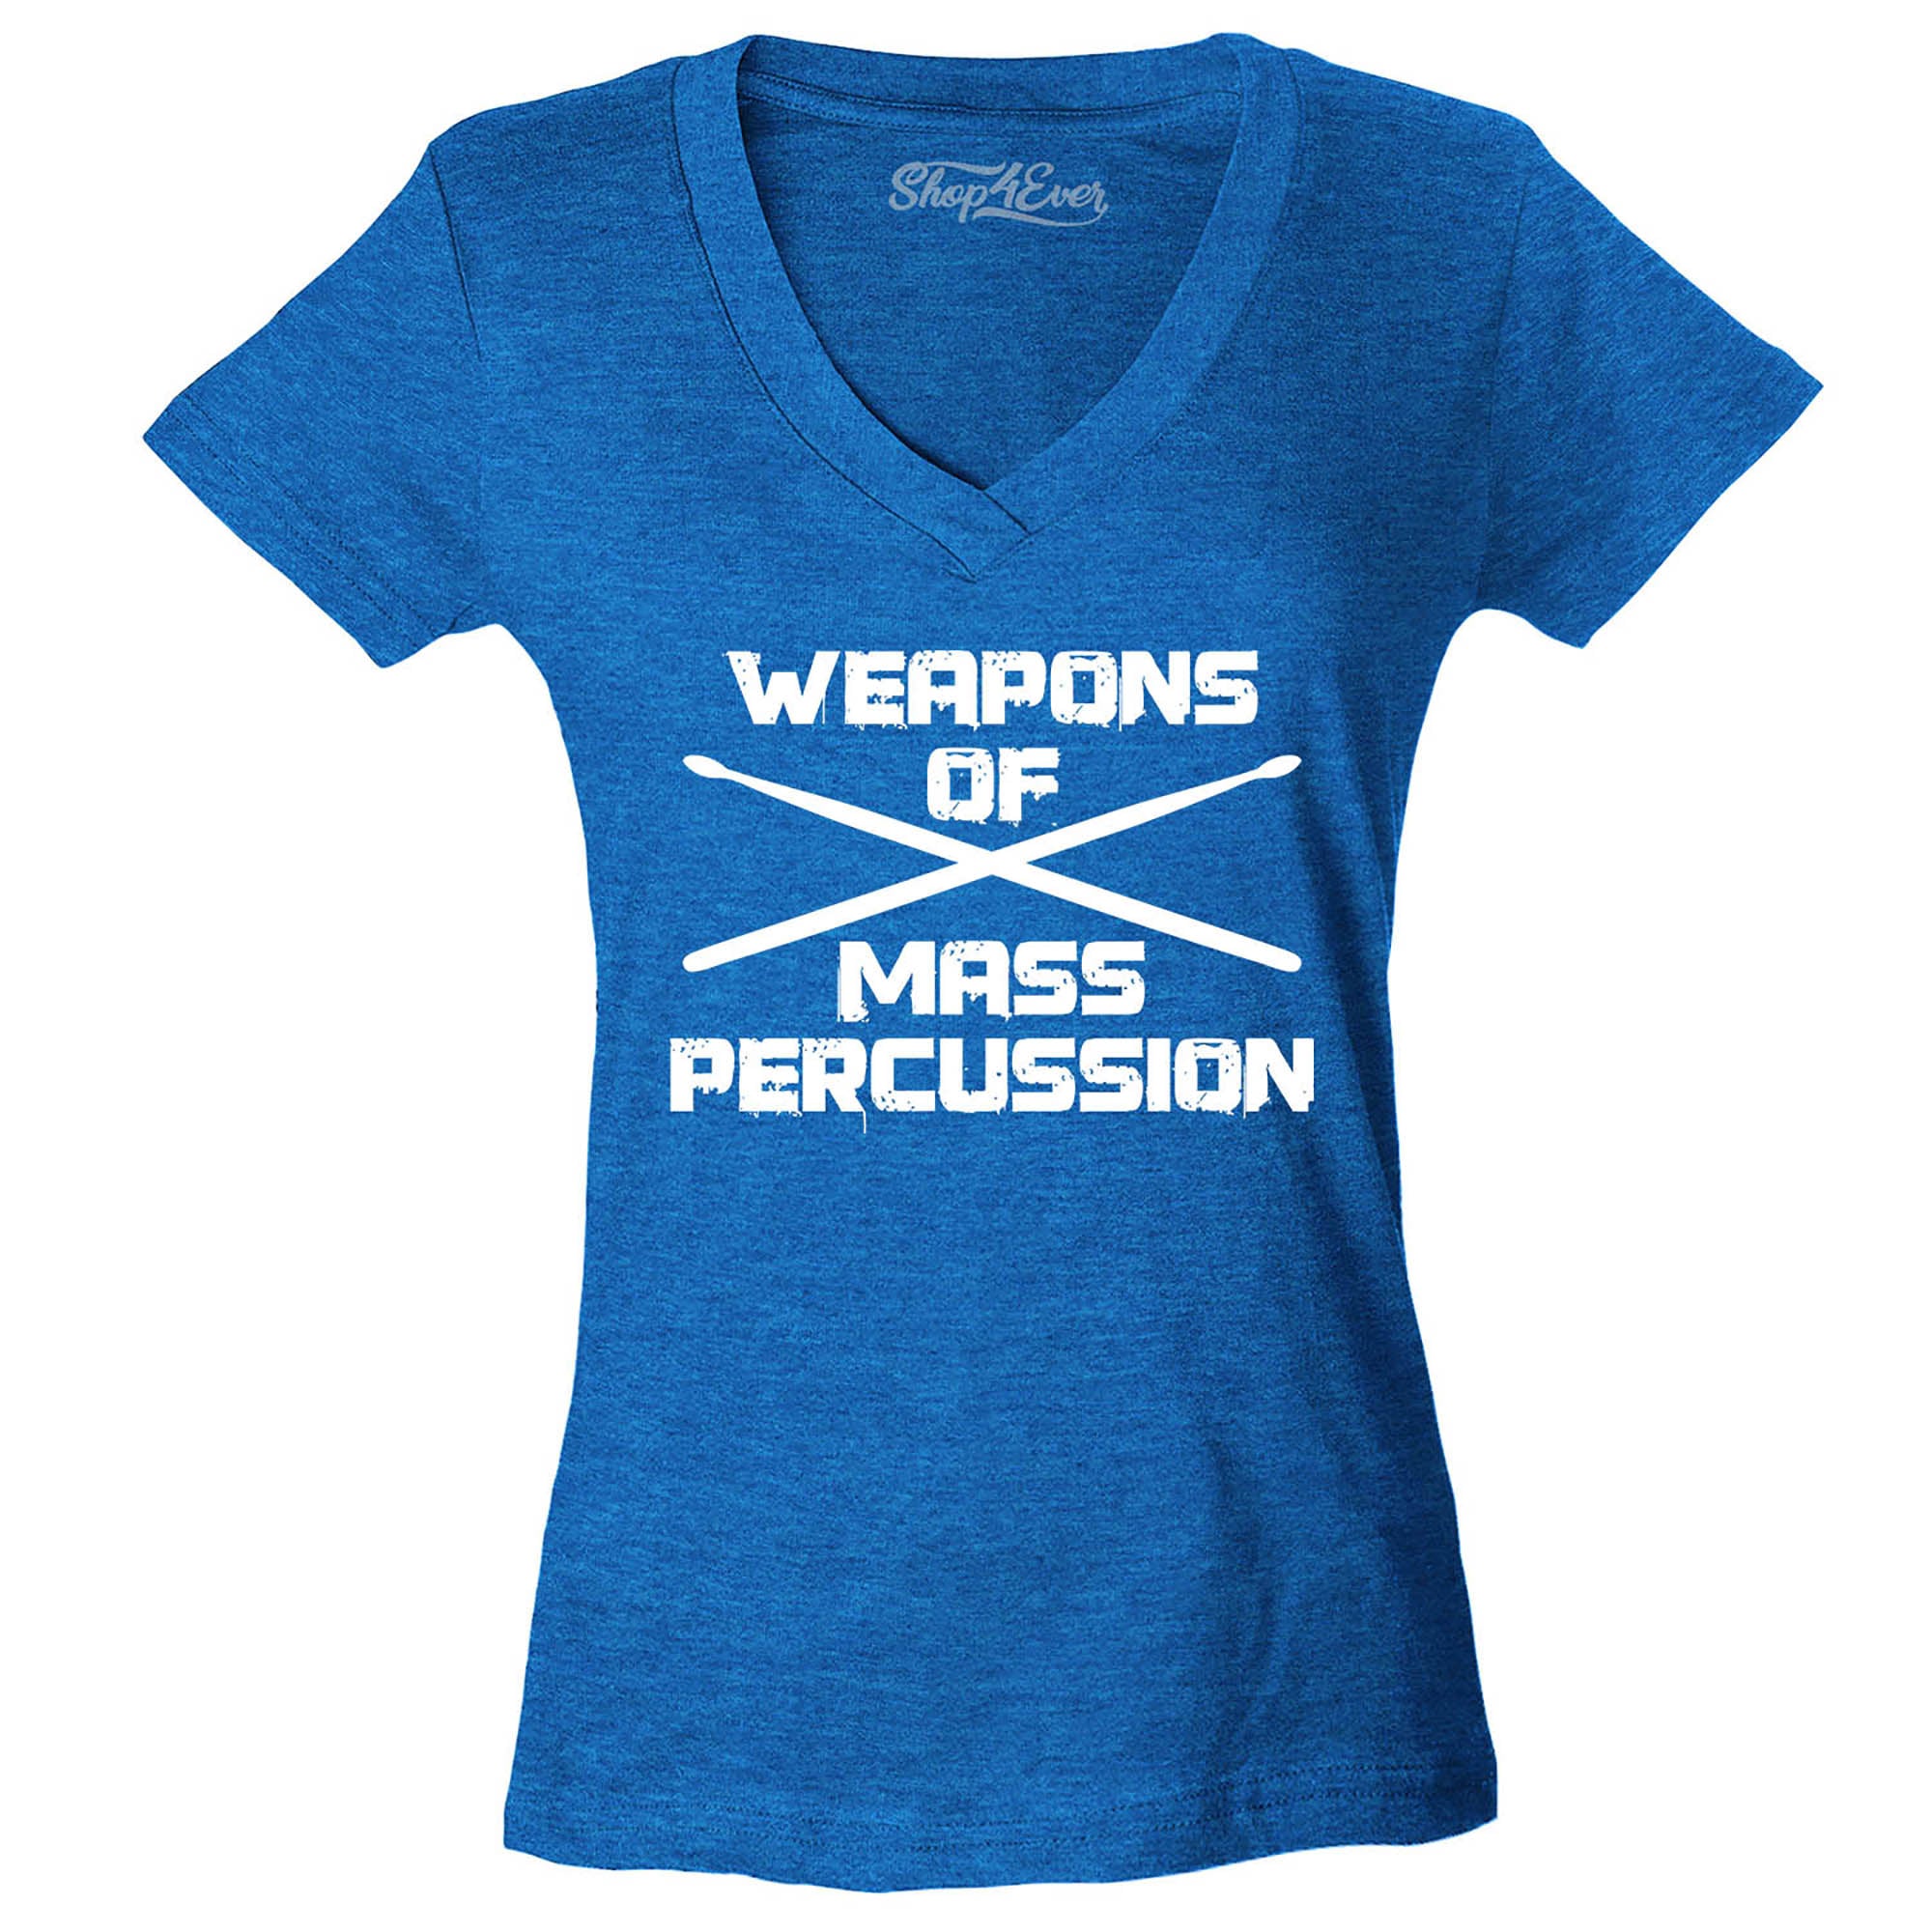 Weapons of Mass Percussion Drumsticks Drummer Women's V-Neck T-Shirt Slim Fit